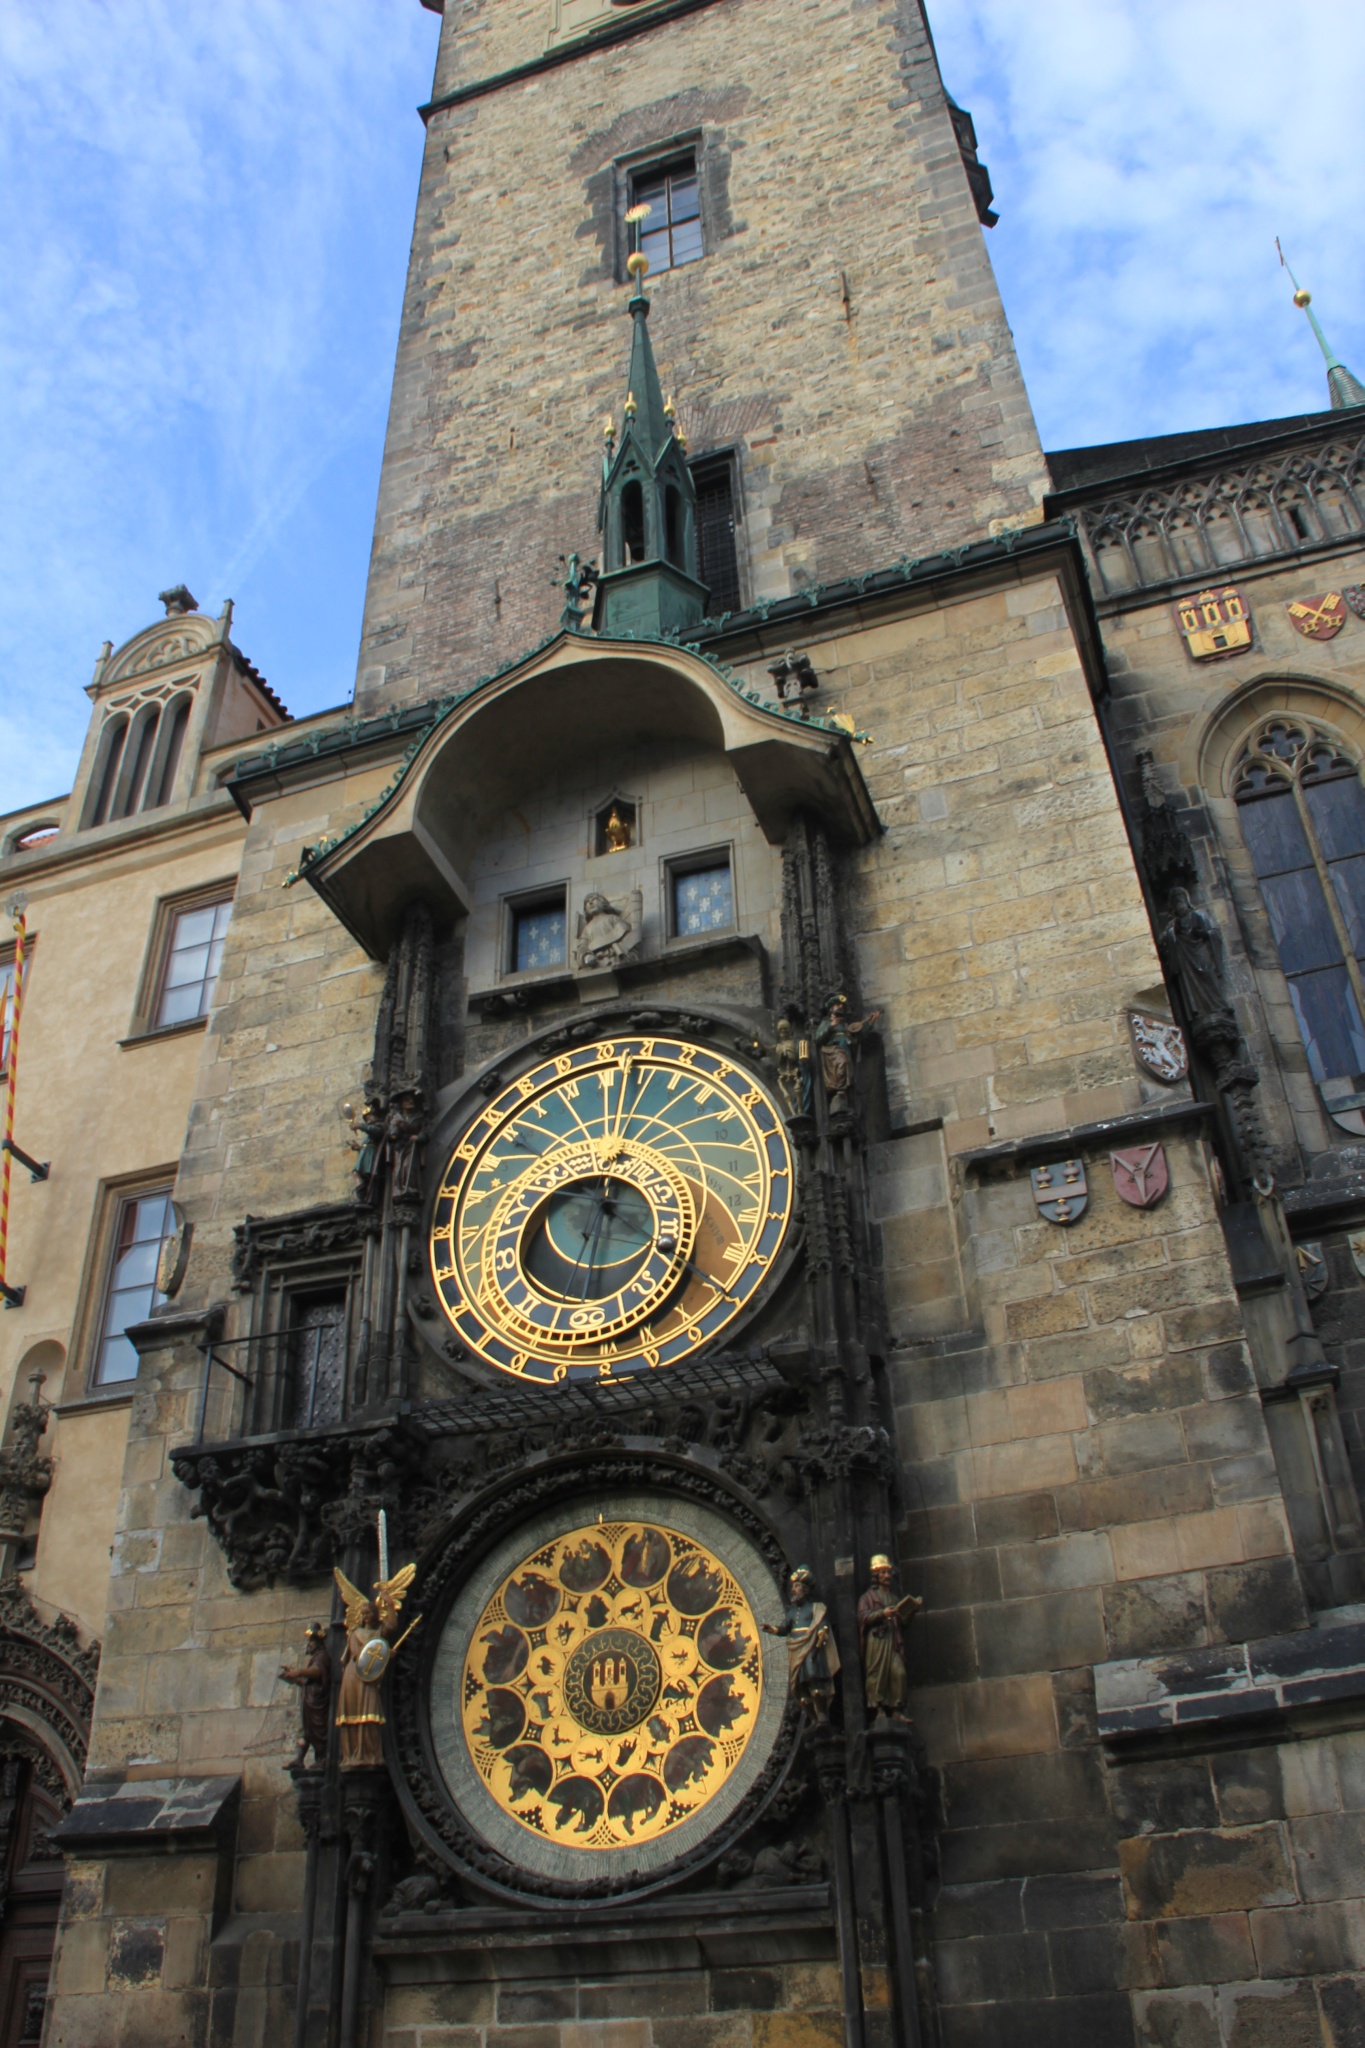 Prague's Astronomical Clock sits in Old Town Square.